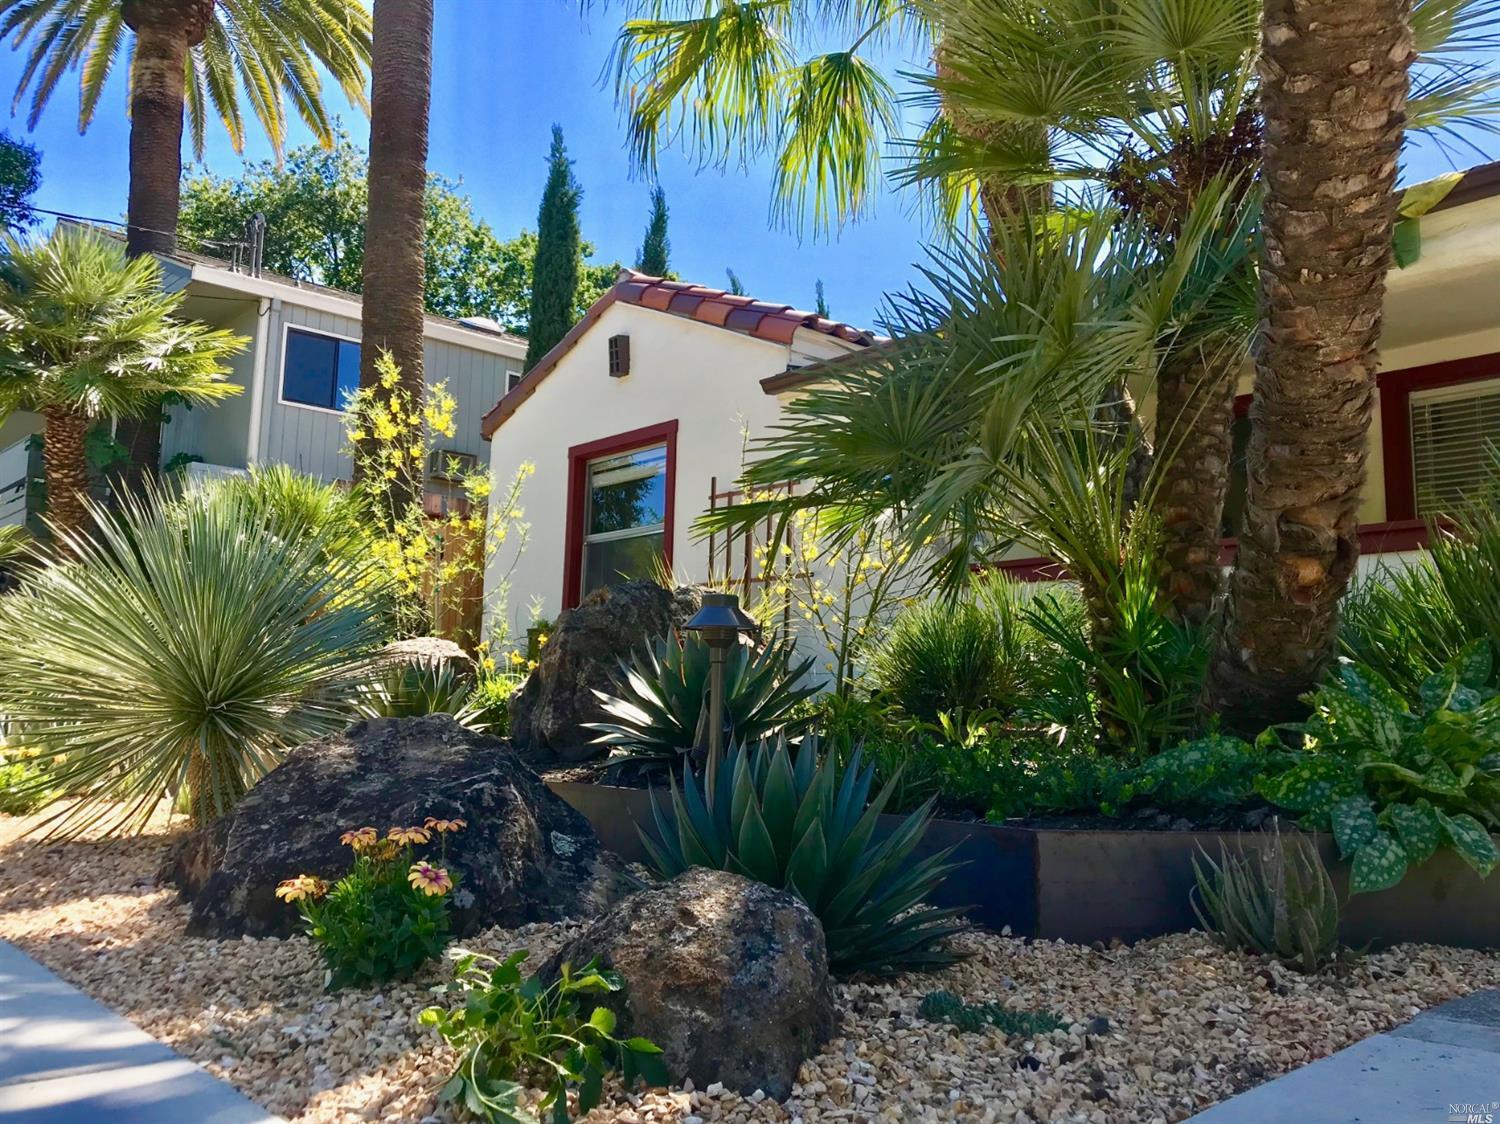 a view of a garden with a potted plants and palm trees